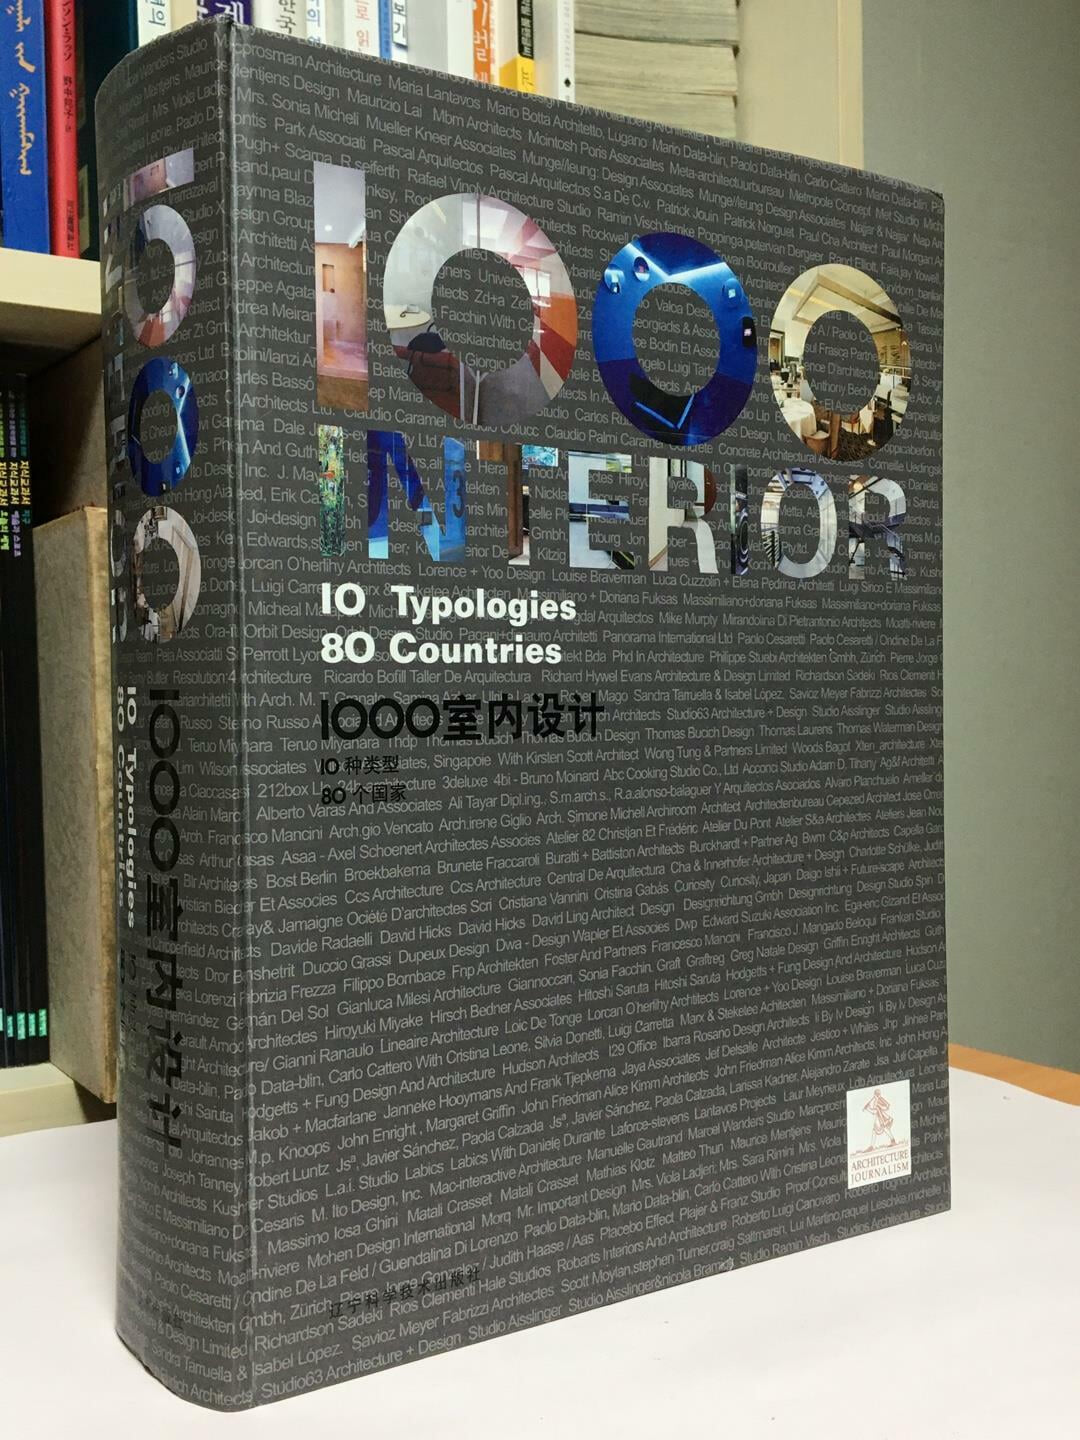 1000 Interior: 10 Typologies, 80 Countries (English and Japanese Edition)